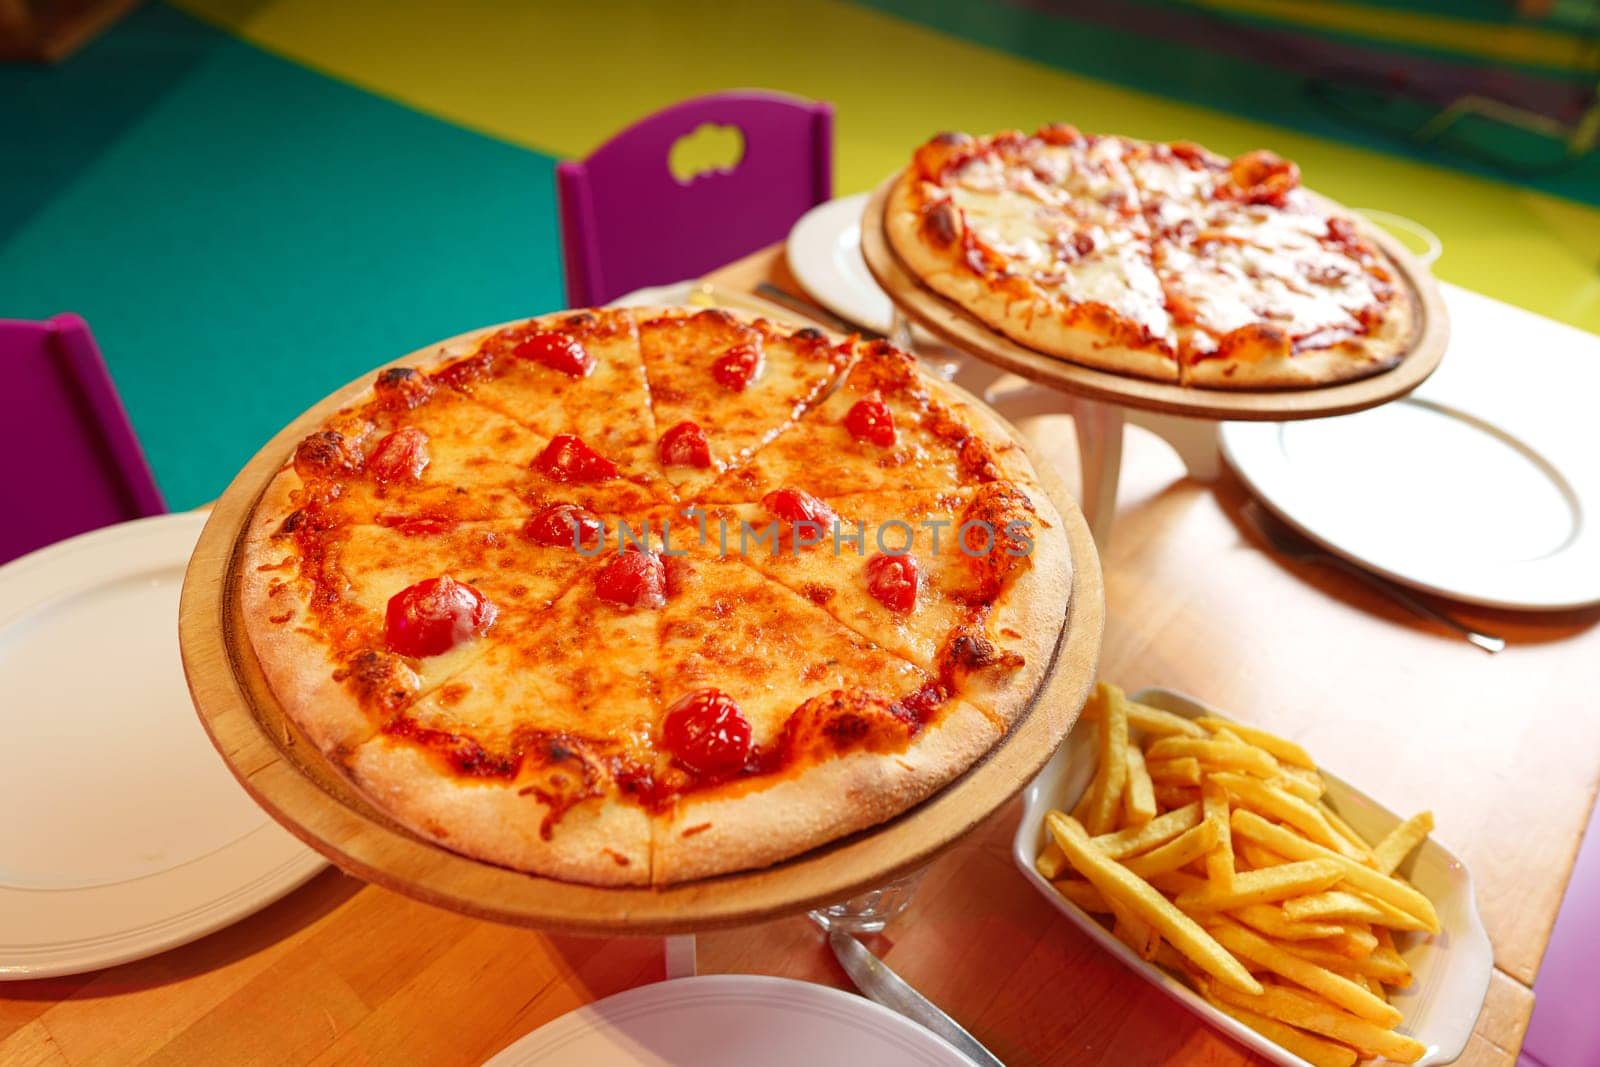 Two delicious pizzas with golden-brown cheese are displayed on elevated wooden stands above a table adorned with a colorful tablecloth. Beside the pizzas, there is a bowl of golden French fries and glasses filled with amber-colored beverages, suggesting an informal outdoor meal.